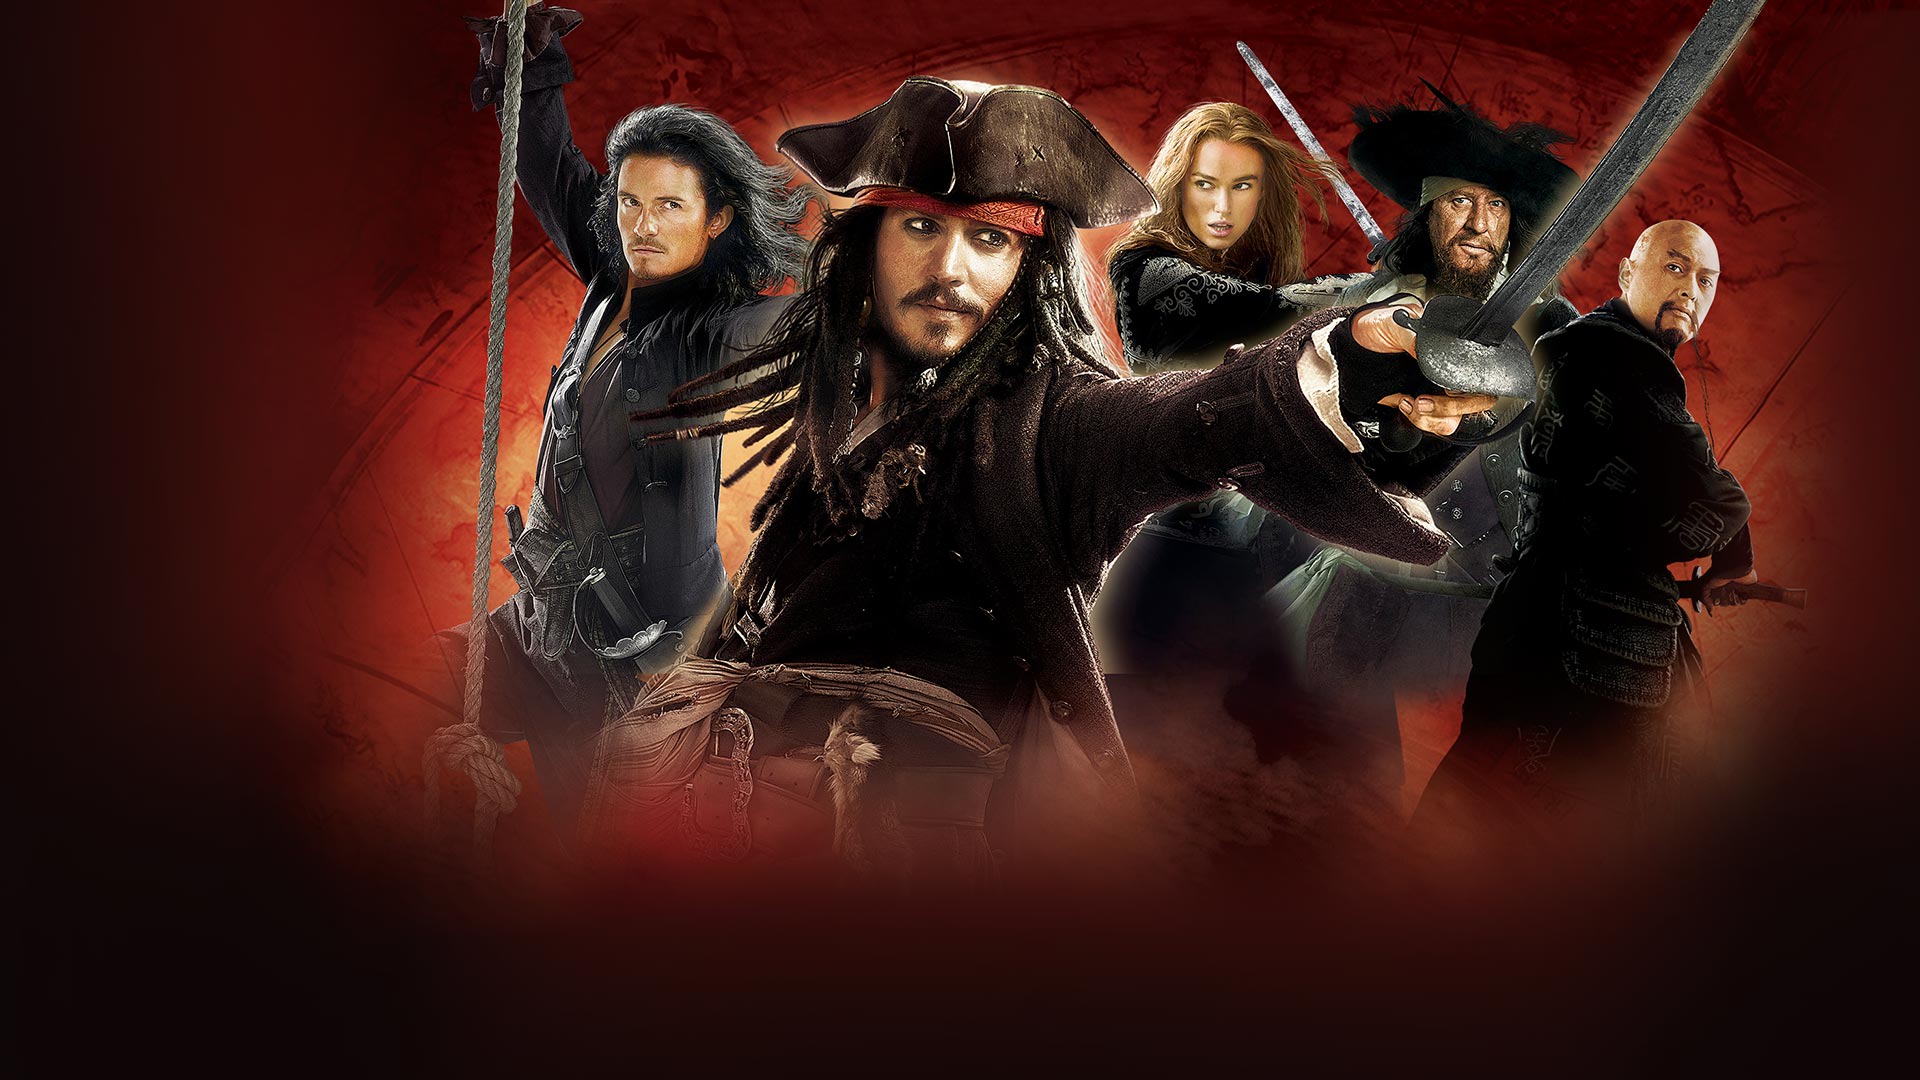 More 'Pirates of the Caribbean' Is Coming to Disney+ - Inside the